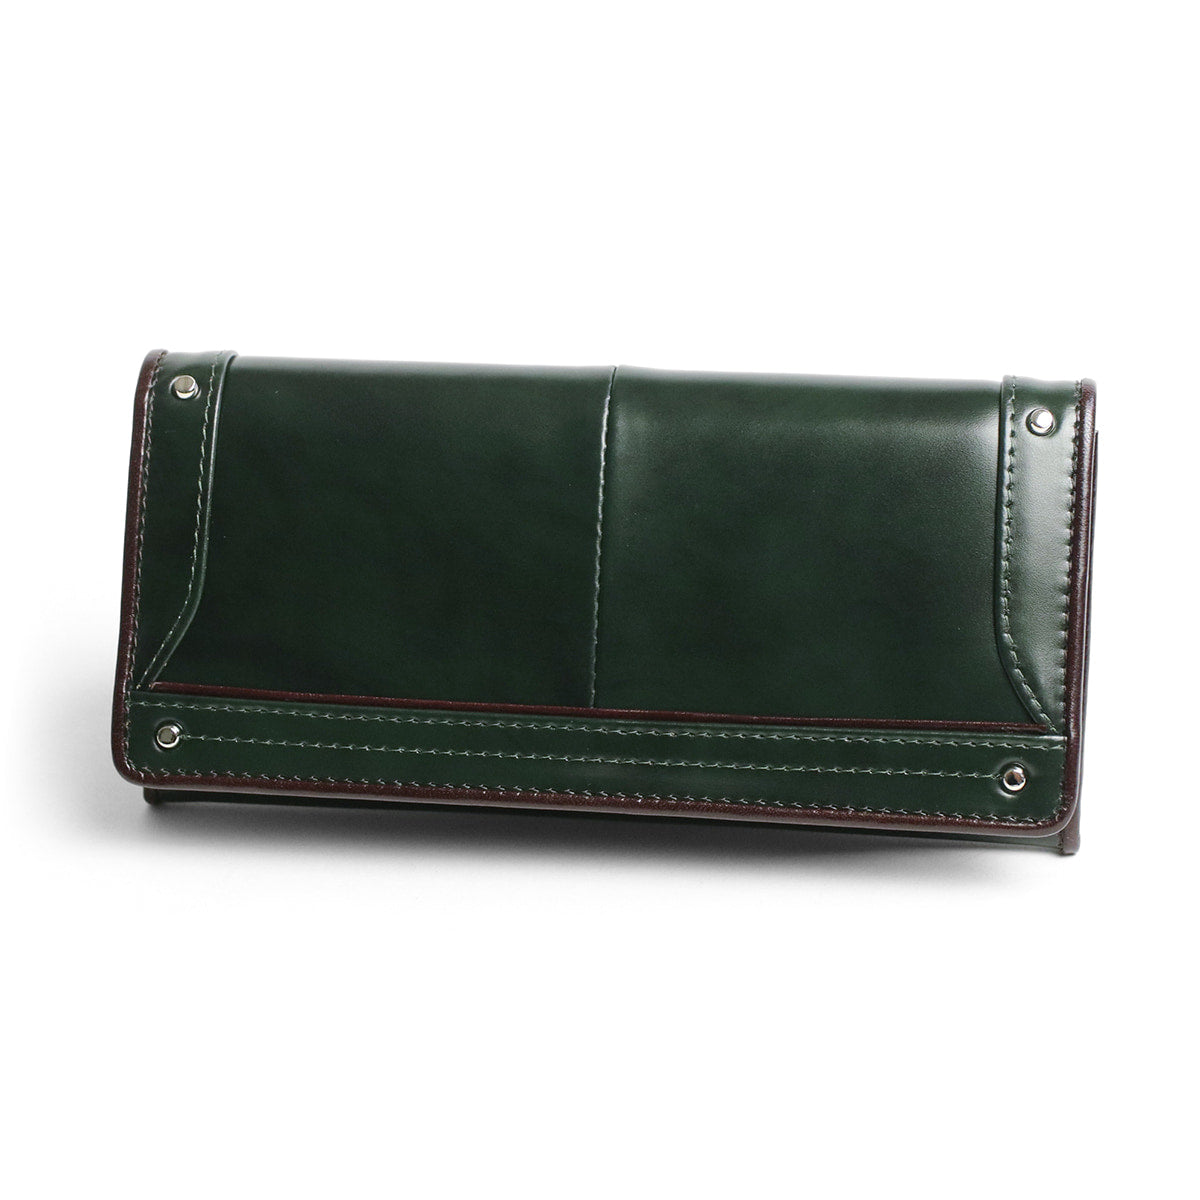 Kiefer neu / Ciao Beautiful uneven dyed leather long wallet